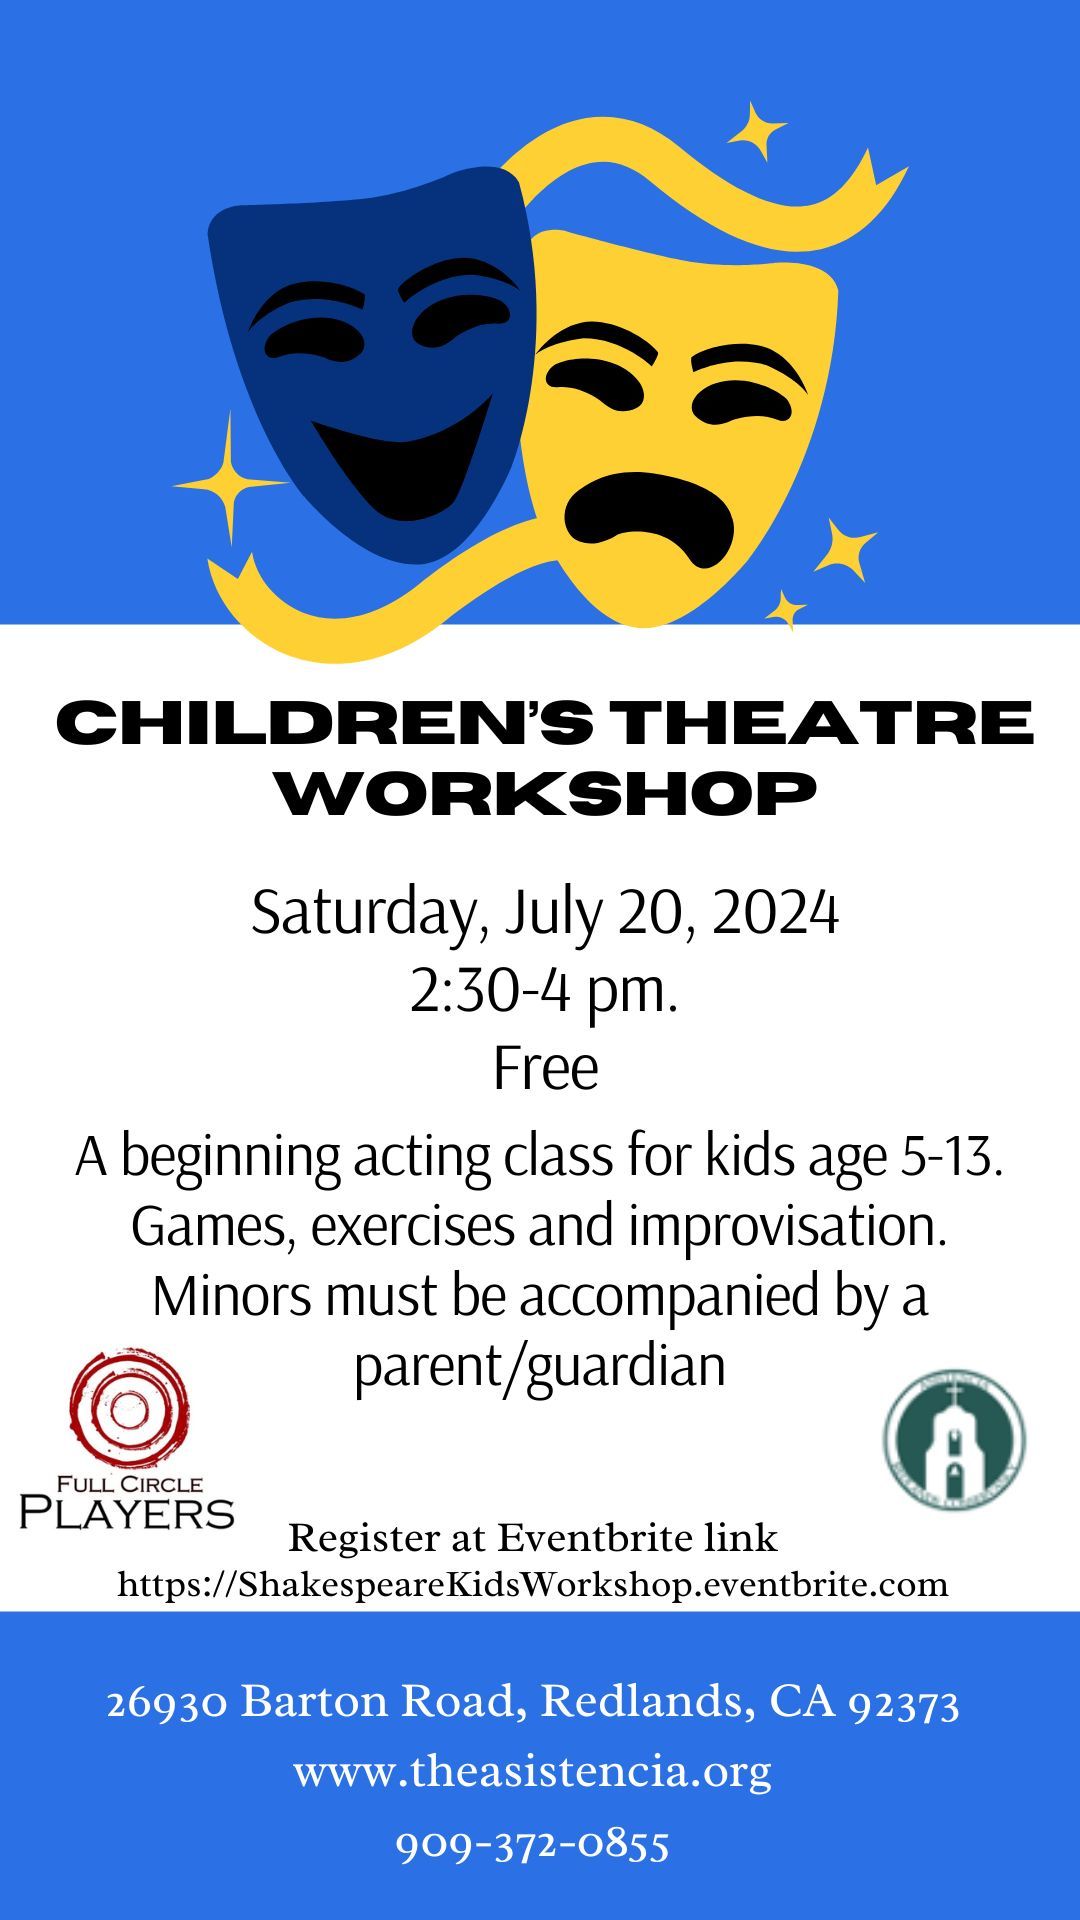 Shakespeare for Kid's Theatre Workshop